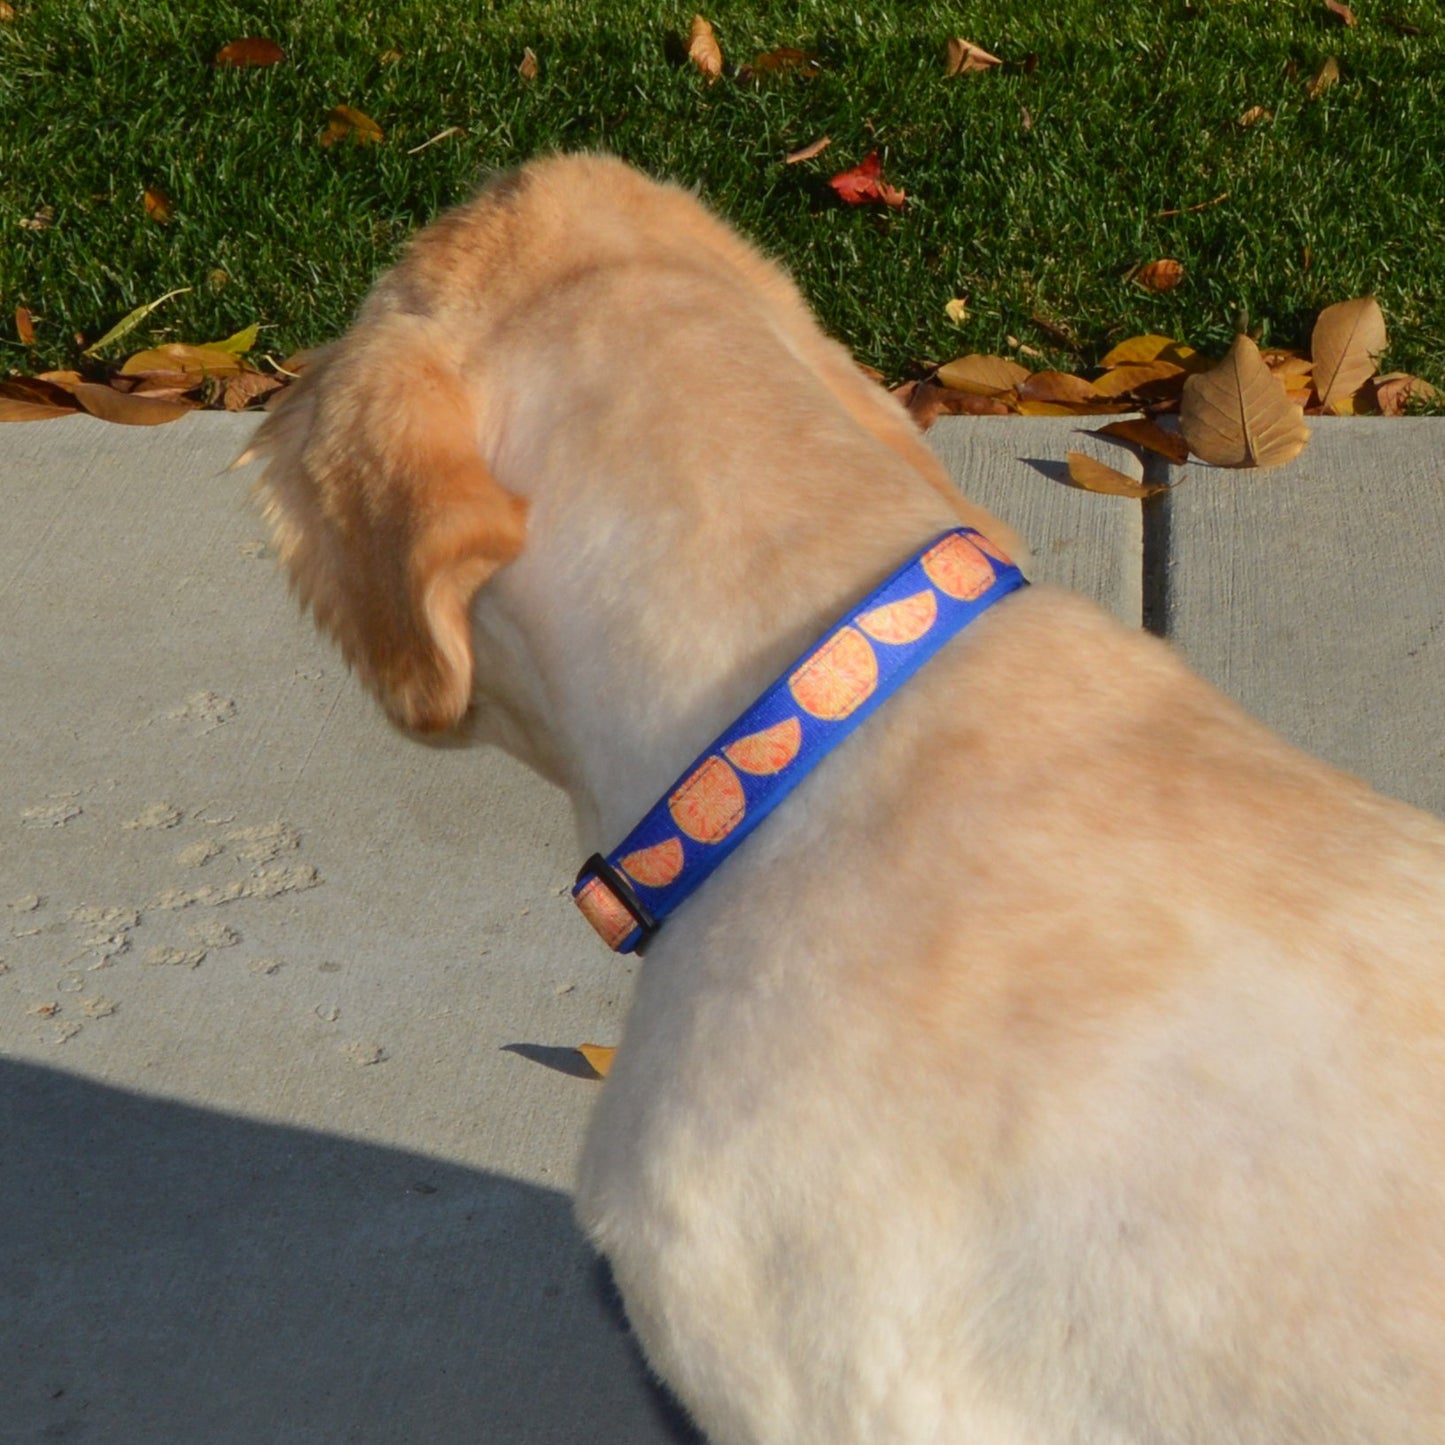 Fruit Patterned Unique Dog Collar -Soft Padded Adjustable, For Small, Medium and Large Dogs